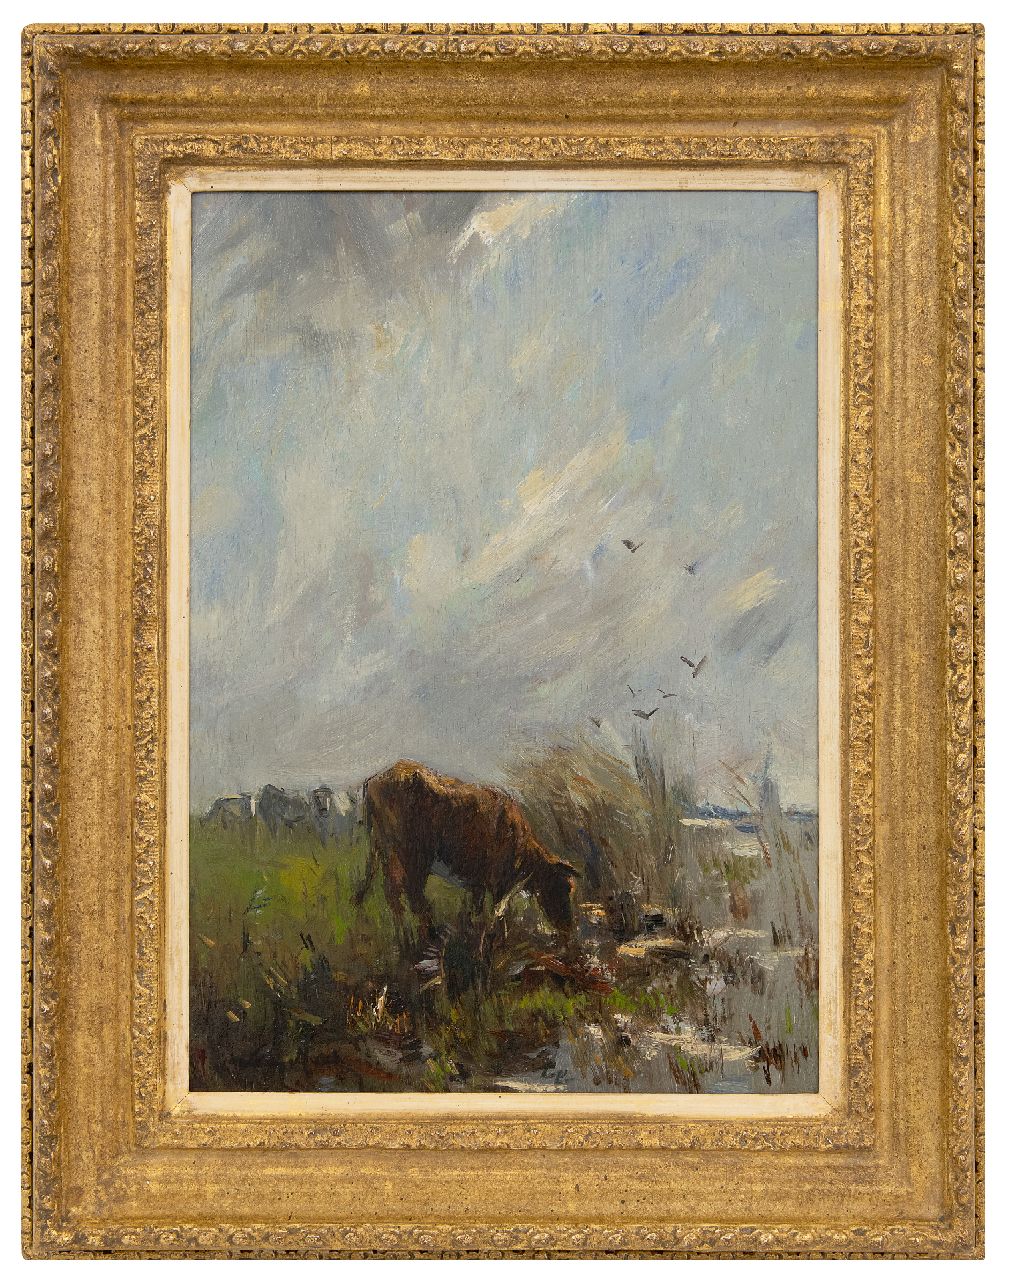 Maris W.  | Willem Maris | Paintings offered for sale | Grazing cows by the water, oil on panel 38.0 x 27.2 cm, signed l.l.